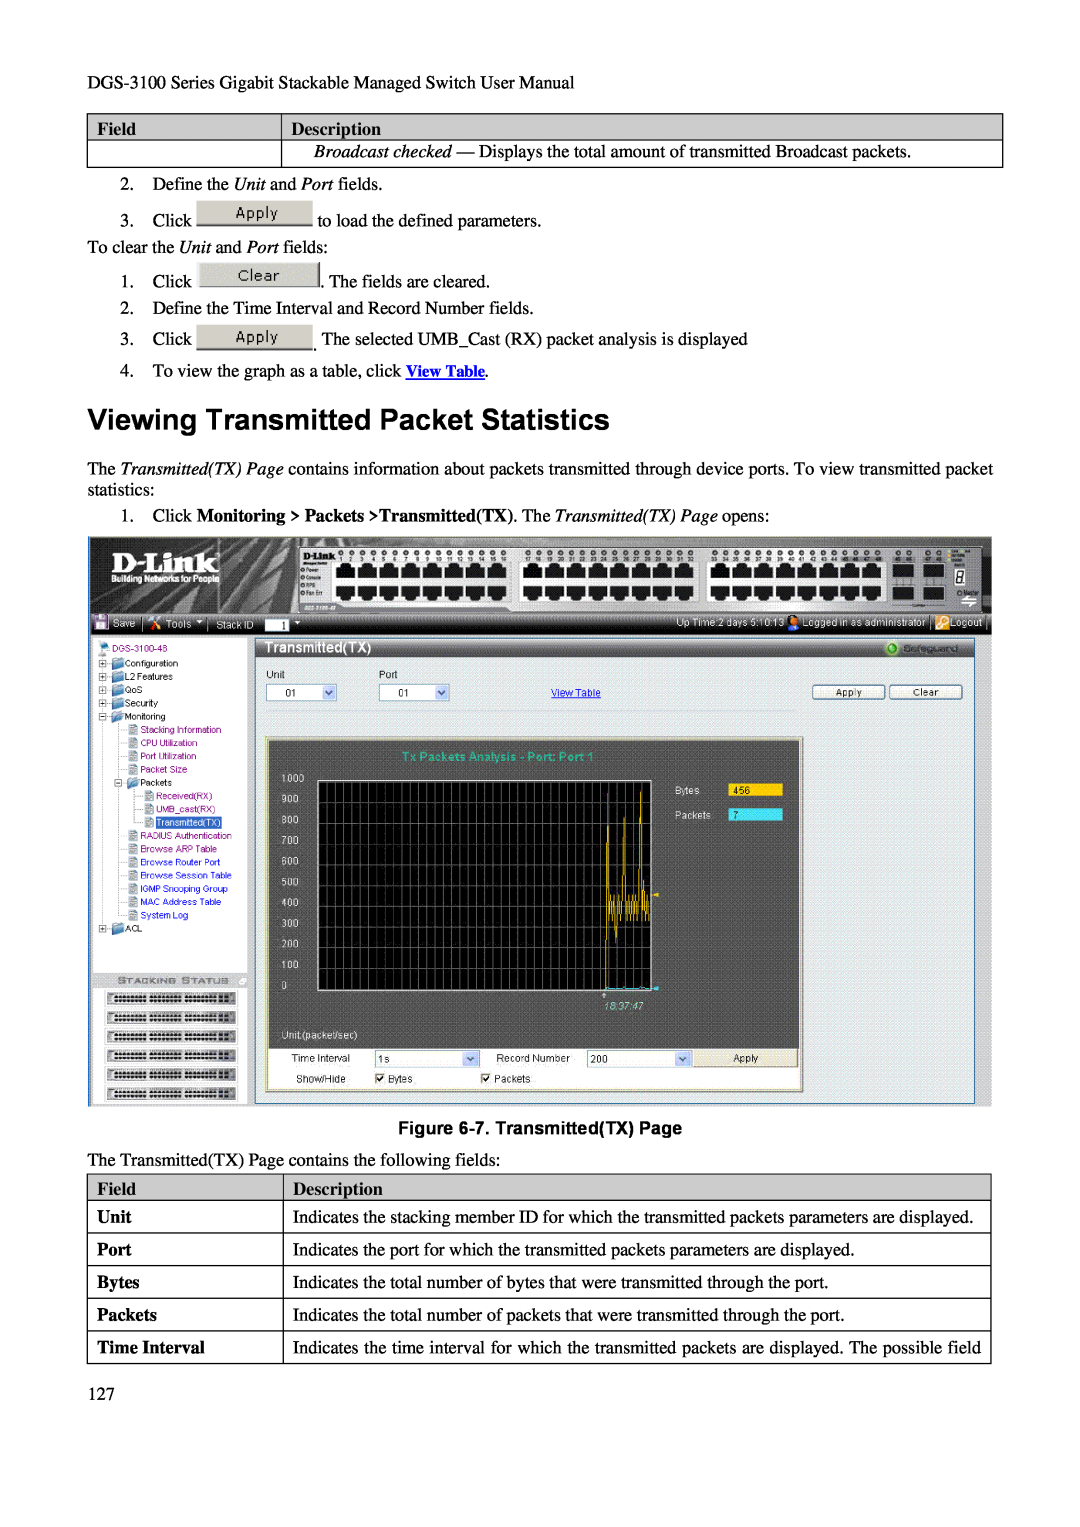 D-Link DGS-3100 user manual Viewing Transmitted Packet Statistics, Field, Description, 7. TransmittedTX Page 